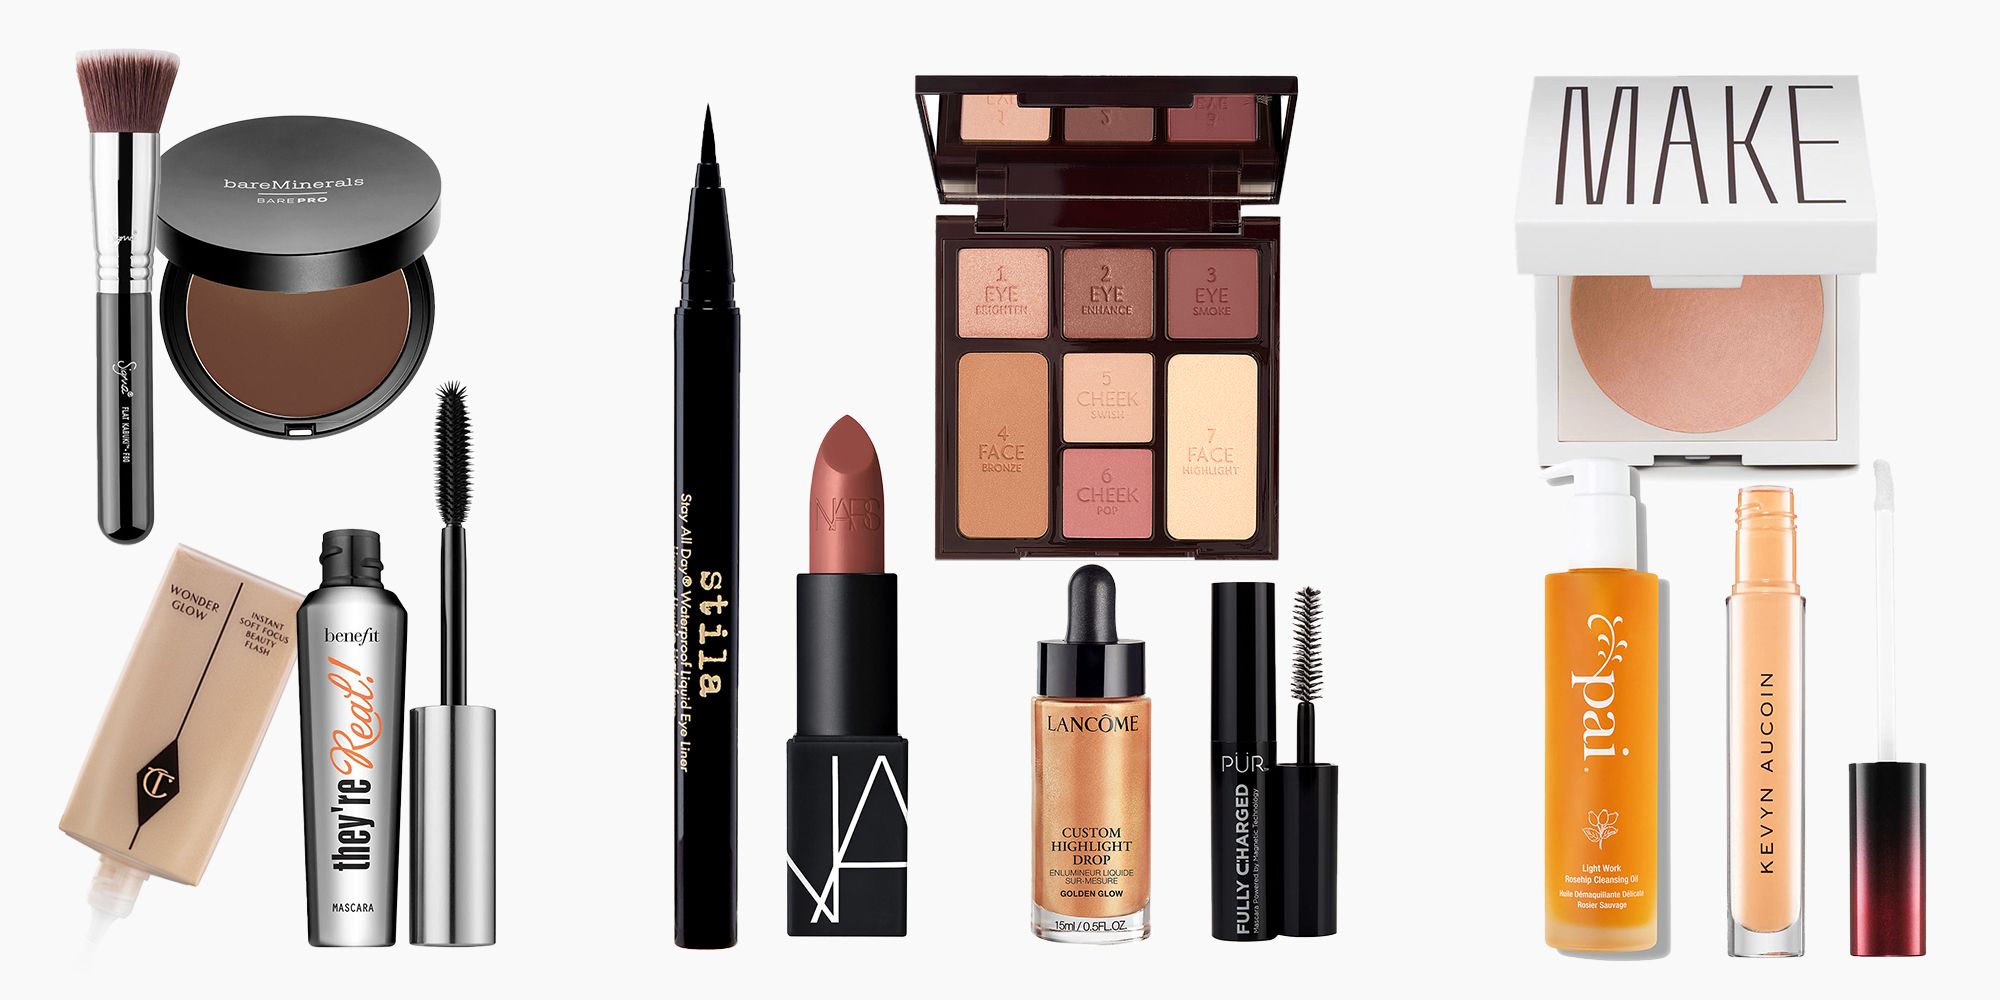 38 Best Makeup Products Ever - Best Makeup Brands and Products